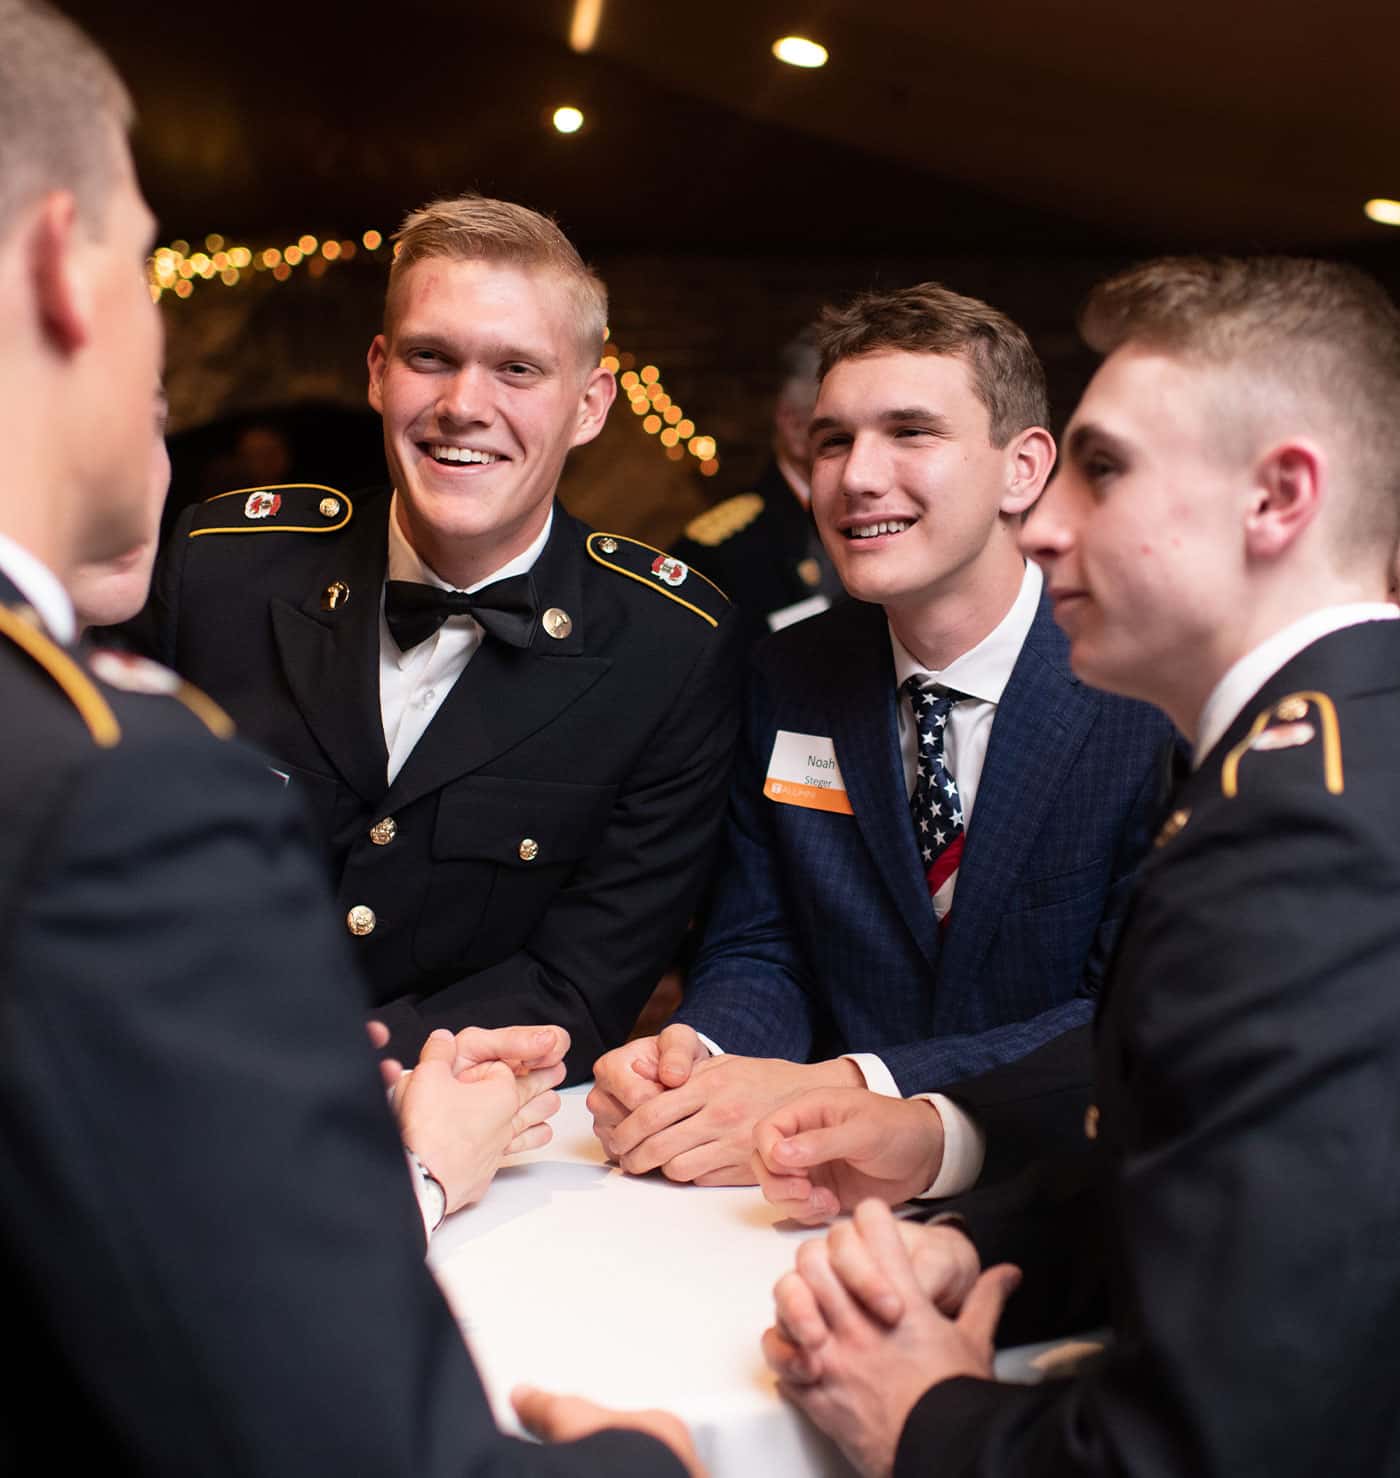 Army ROTC alumni talk during the Hall of Fame induction